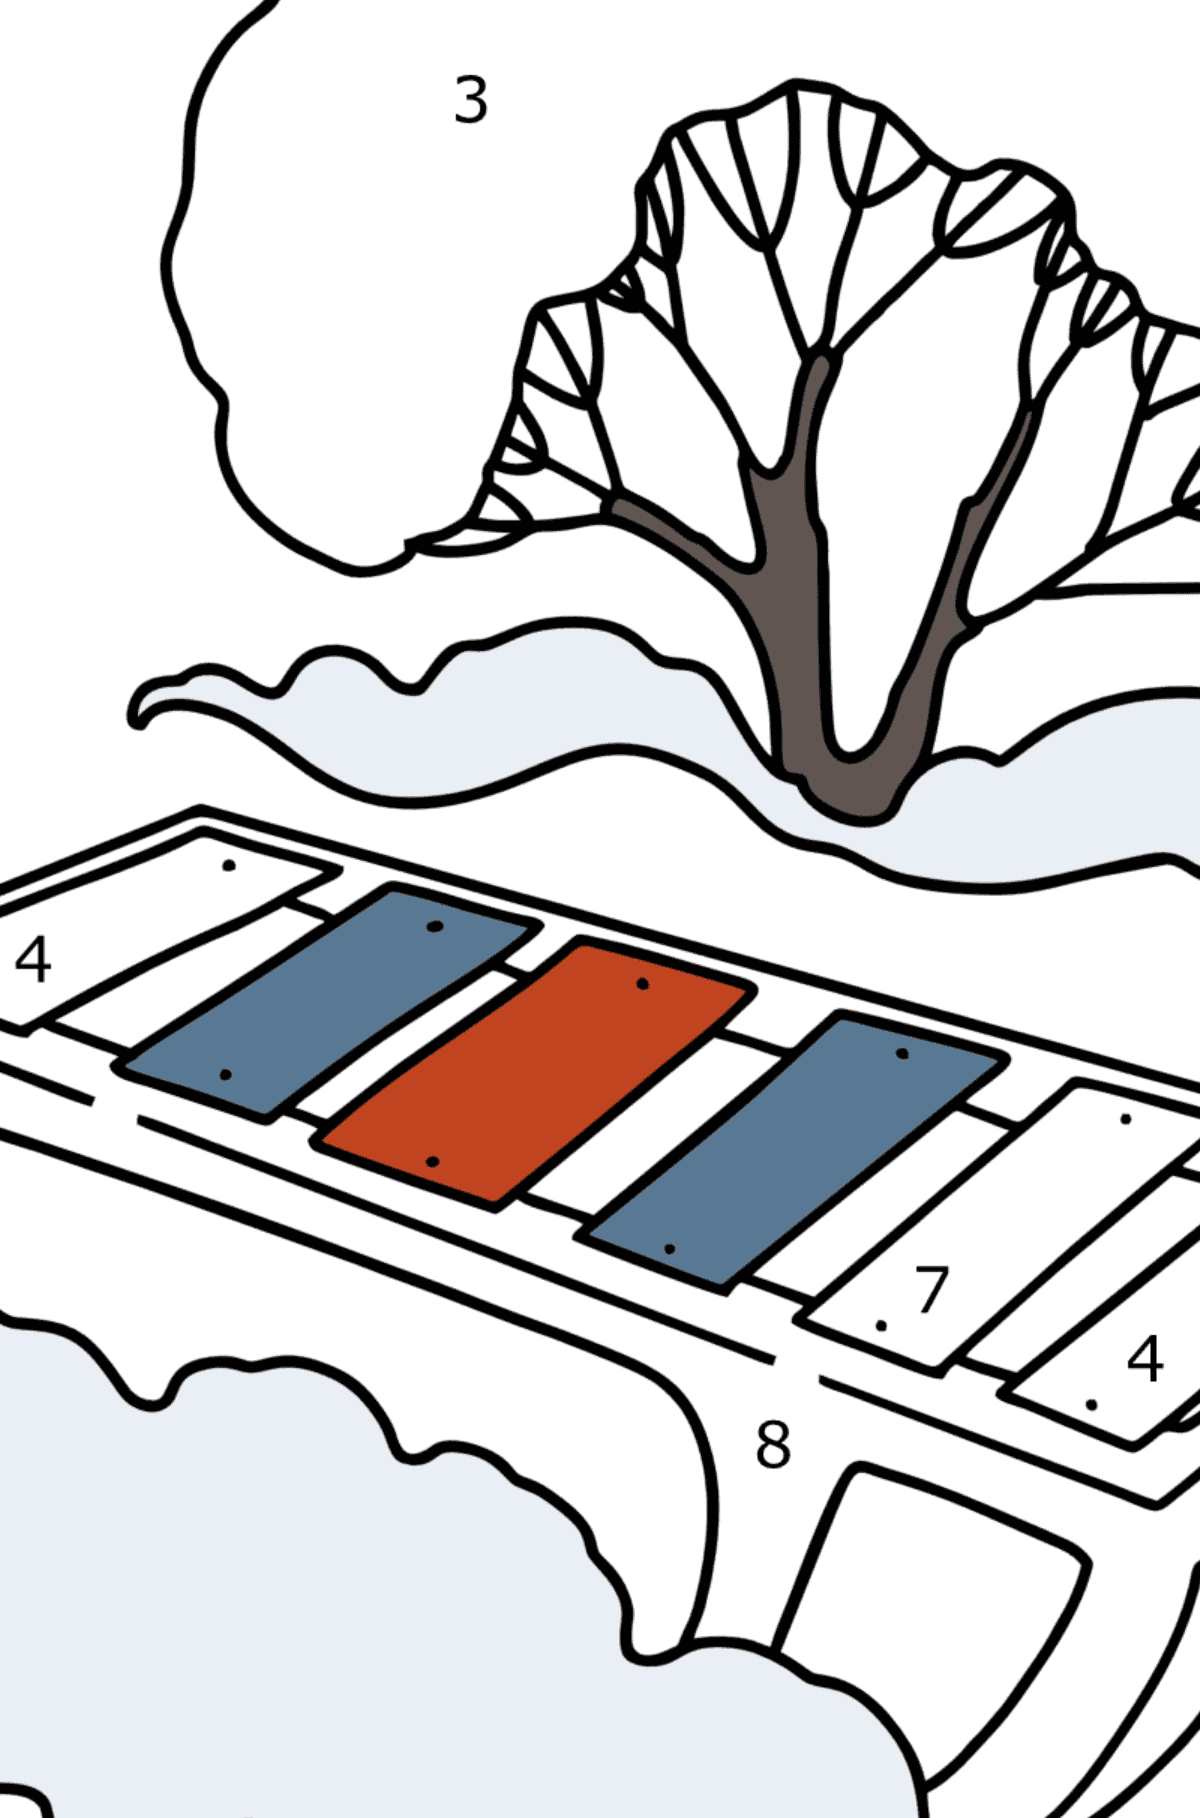 Coloring page - Sled for Kids - Coloring by Numbers for Kids